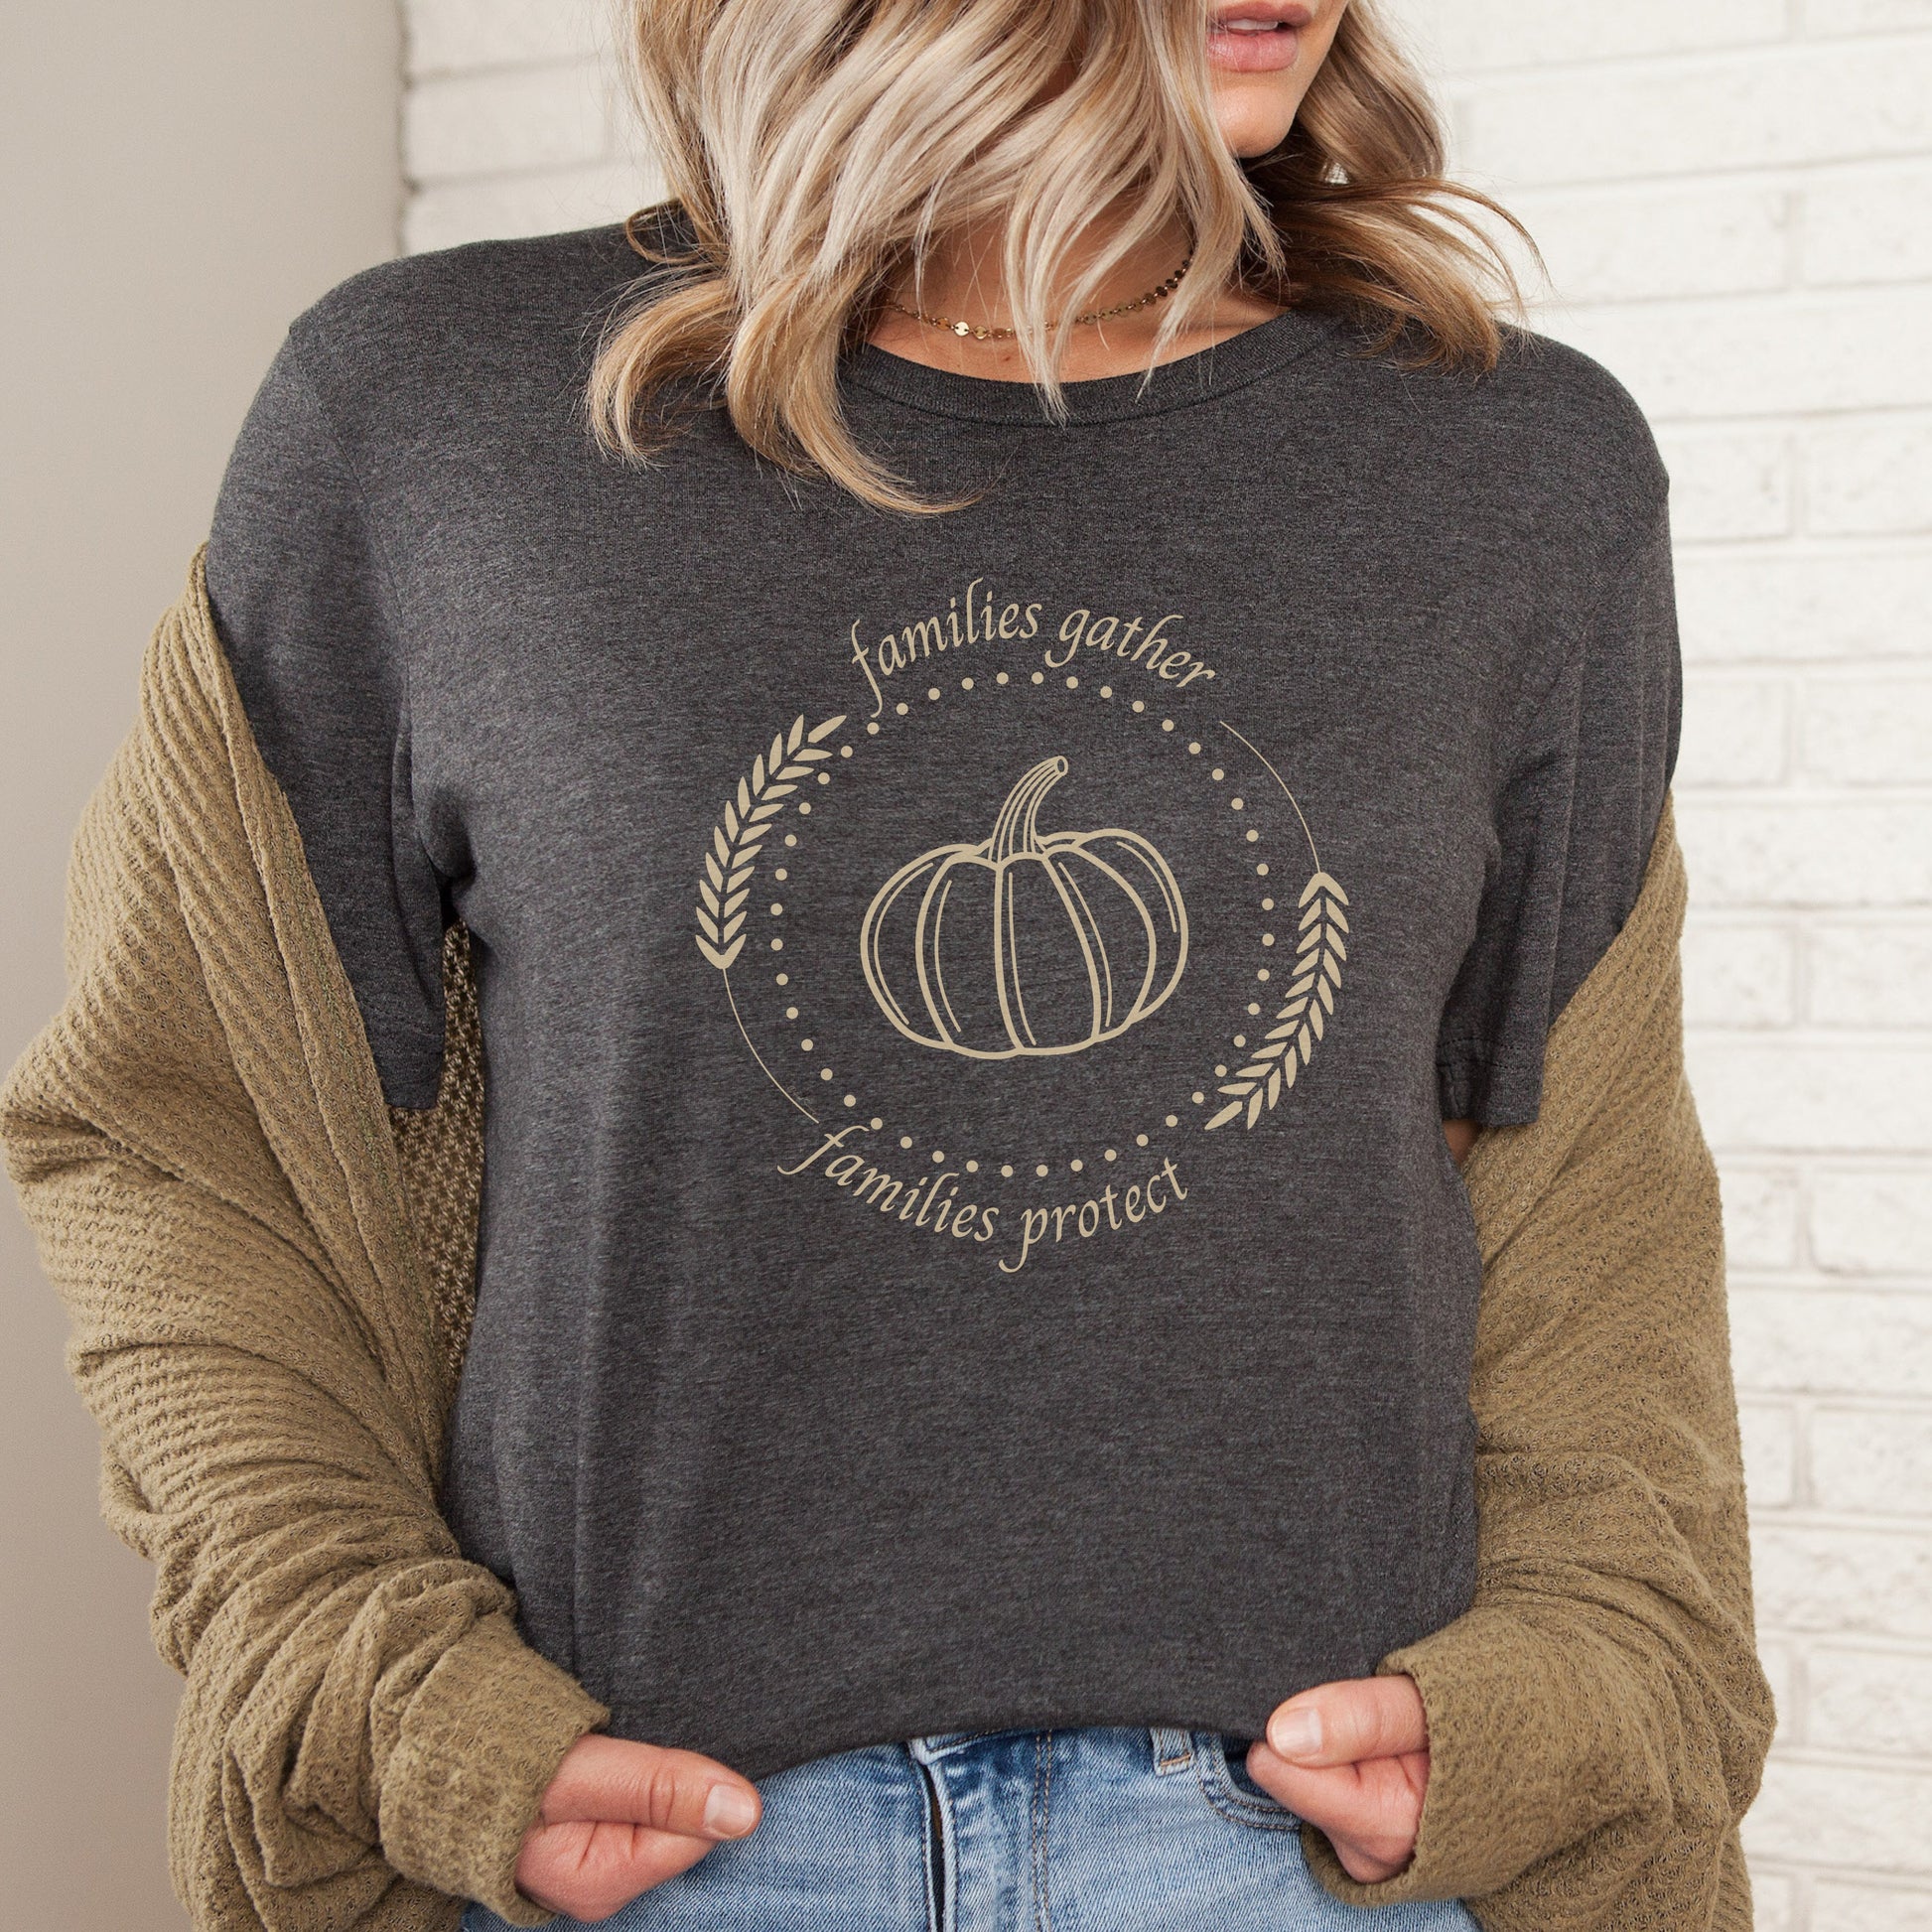 Adorned with a heartwarming autumn-fall harvest pumpkin graphic and the inspiring message Families Gather, Families Protect, this White T-shirt stands as a testament to the unwavering support and protection families should offer to survivors.